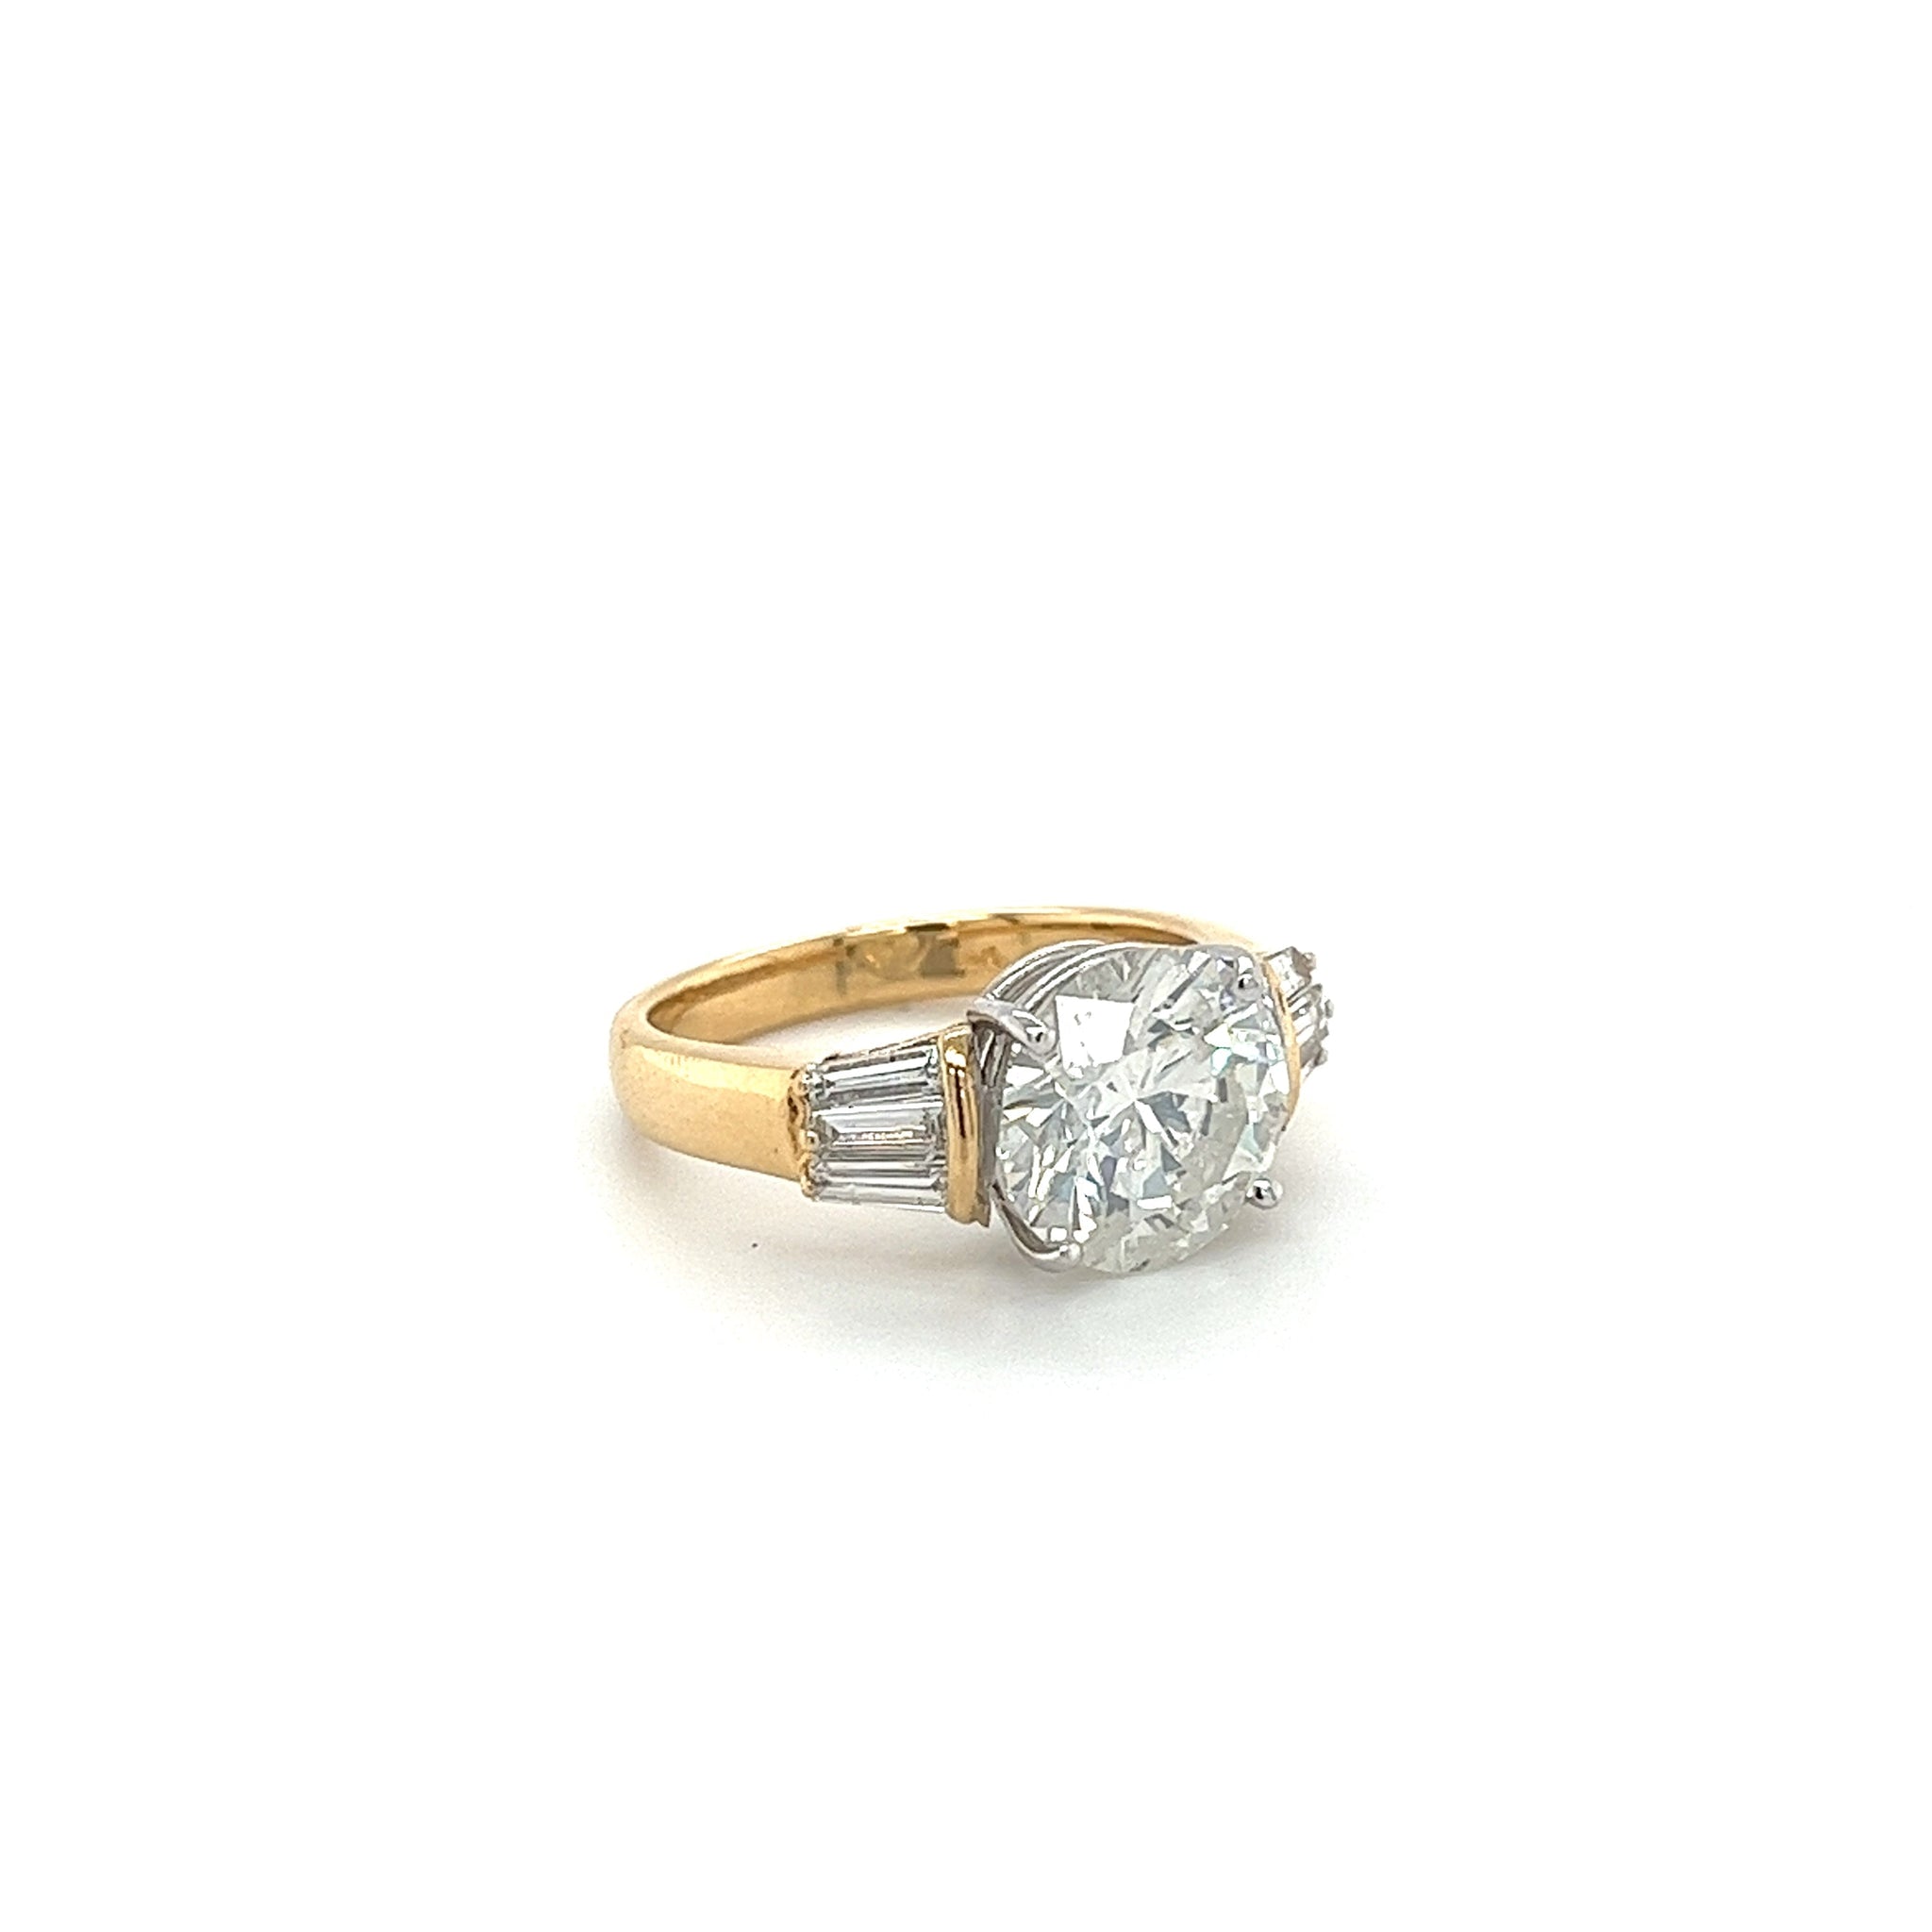 Natural 4.21 Carat Round Diamond Engagement Ring With Baguette Diamonds in Two Tone 18k Gold